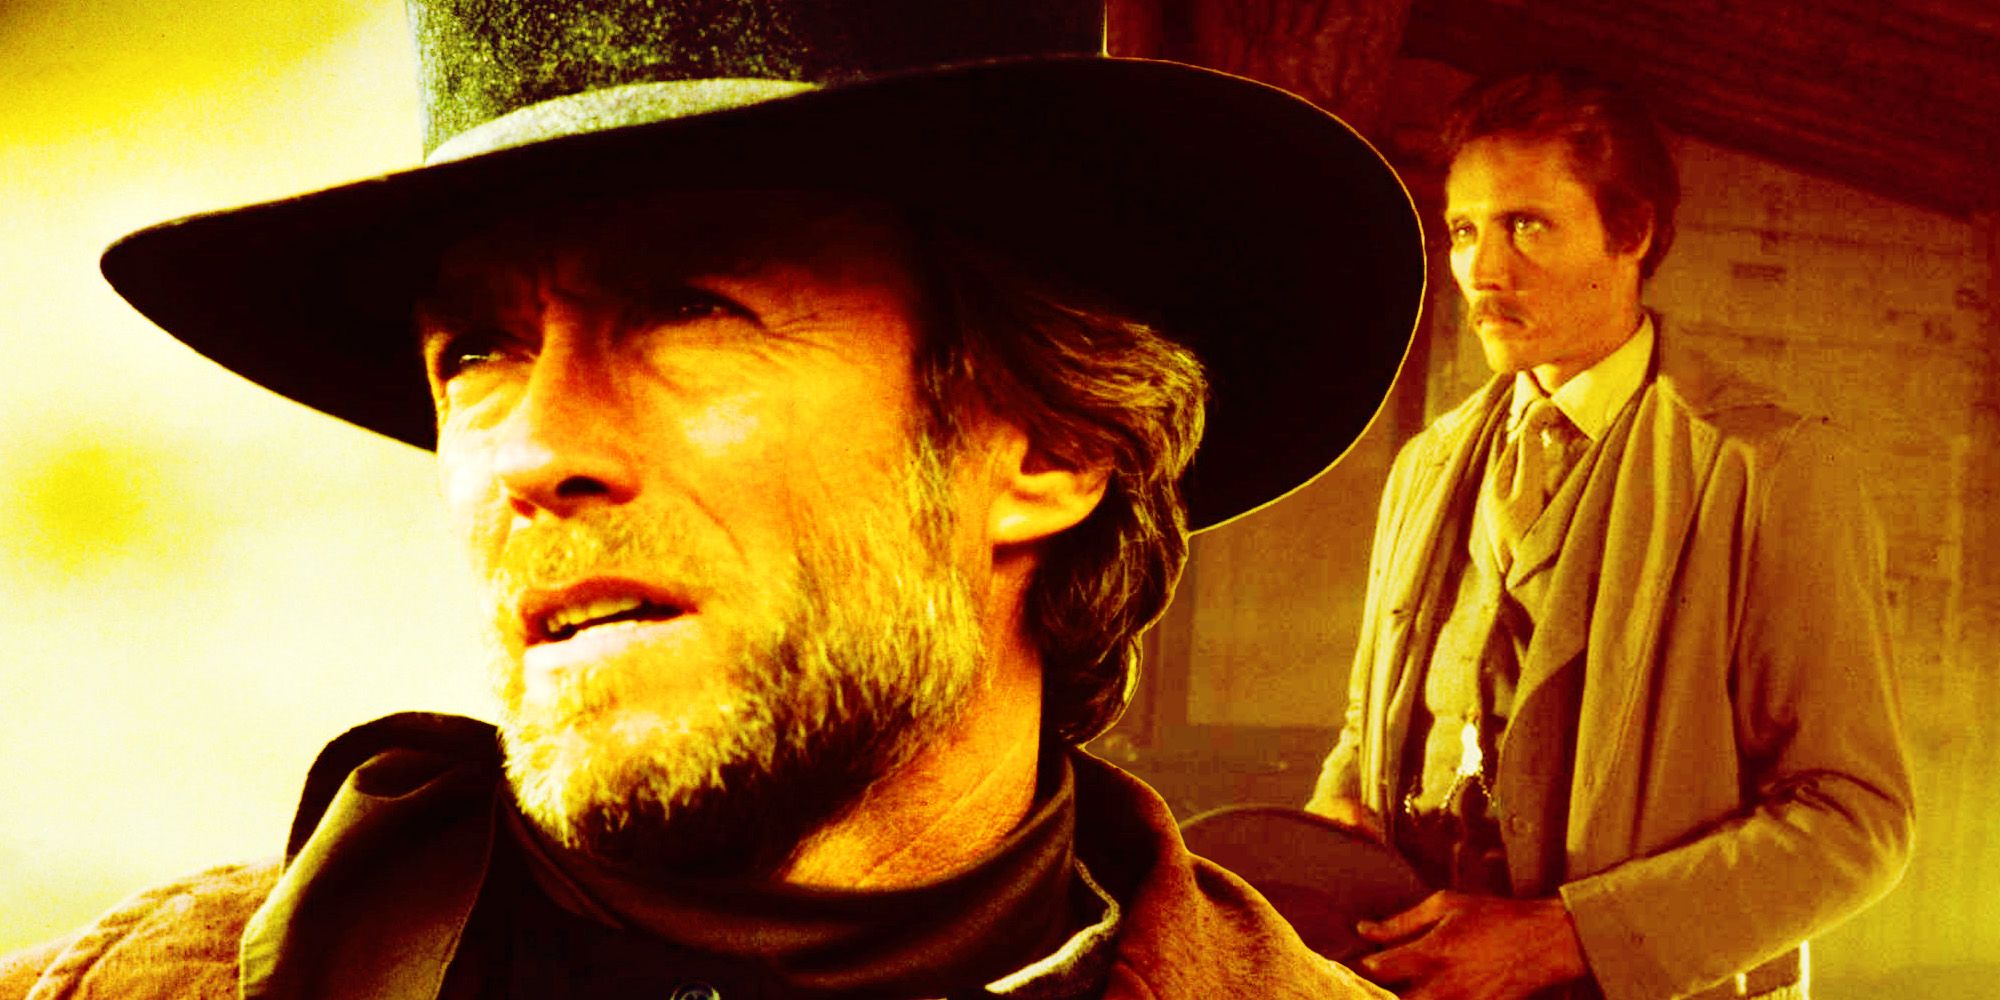 Clint Eastwood as Preacher from 1985's Pale Rider and Christopher Walken from Heaven's Gate